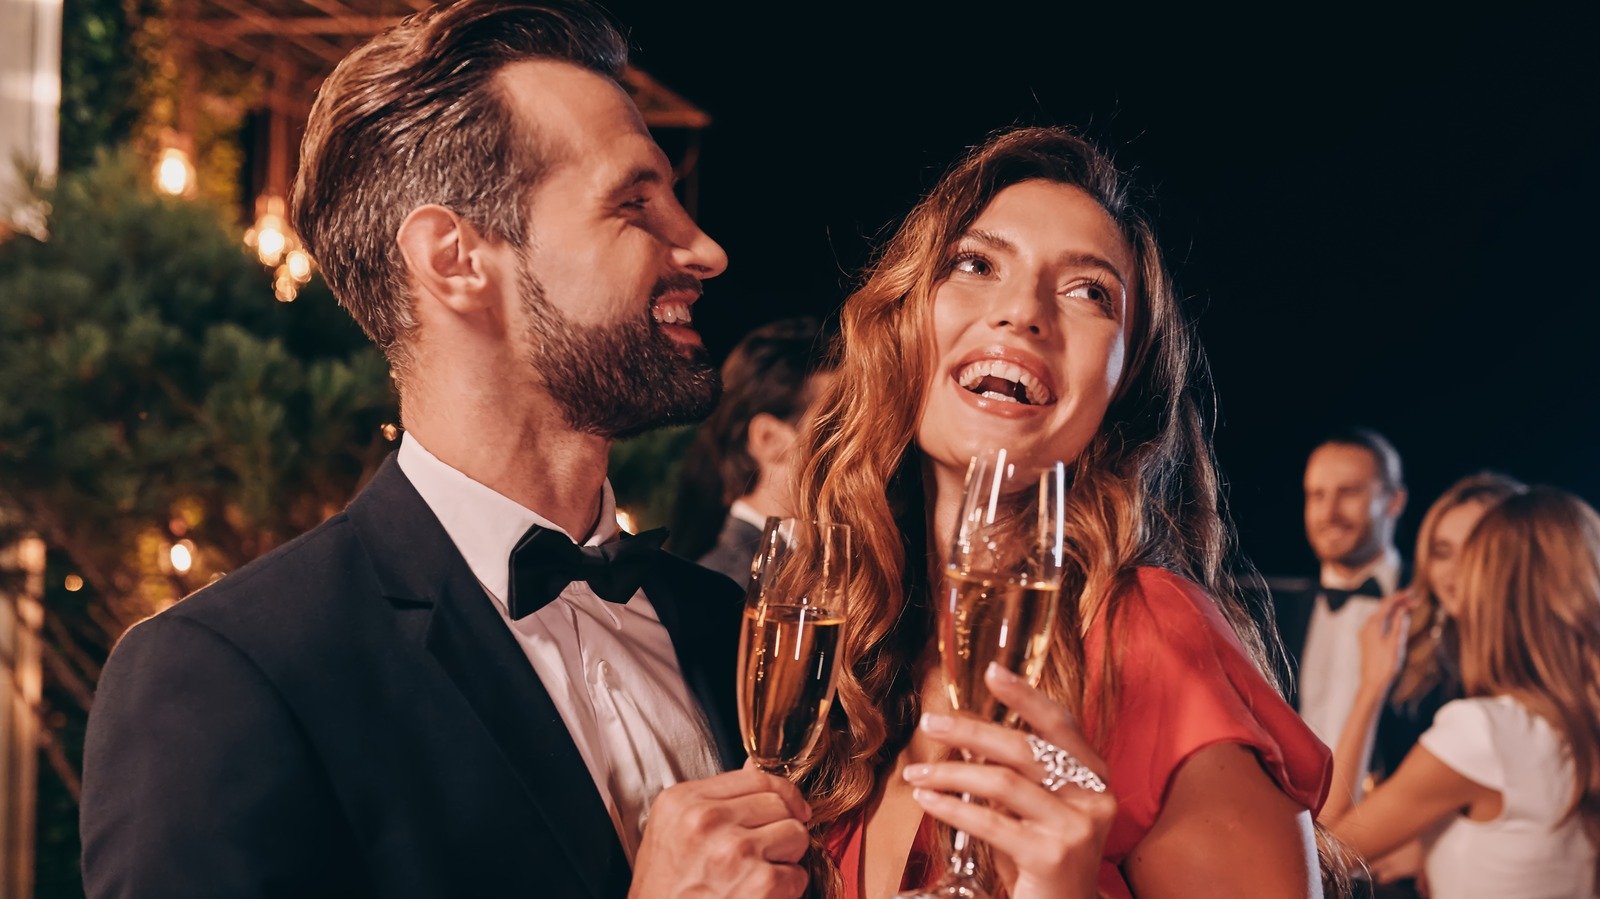 Plus-One Etiquette: Is It Ever Acceptable To Bring A Stranger To A Wedding? - Glam